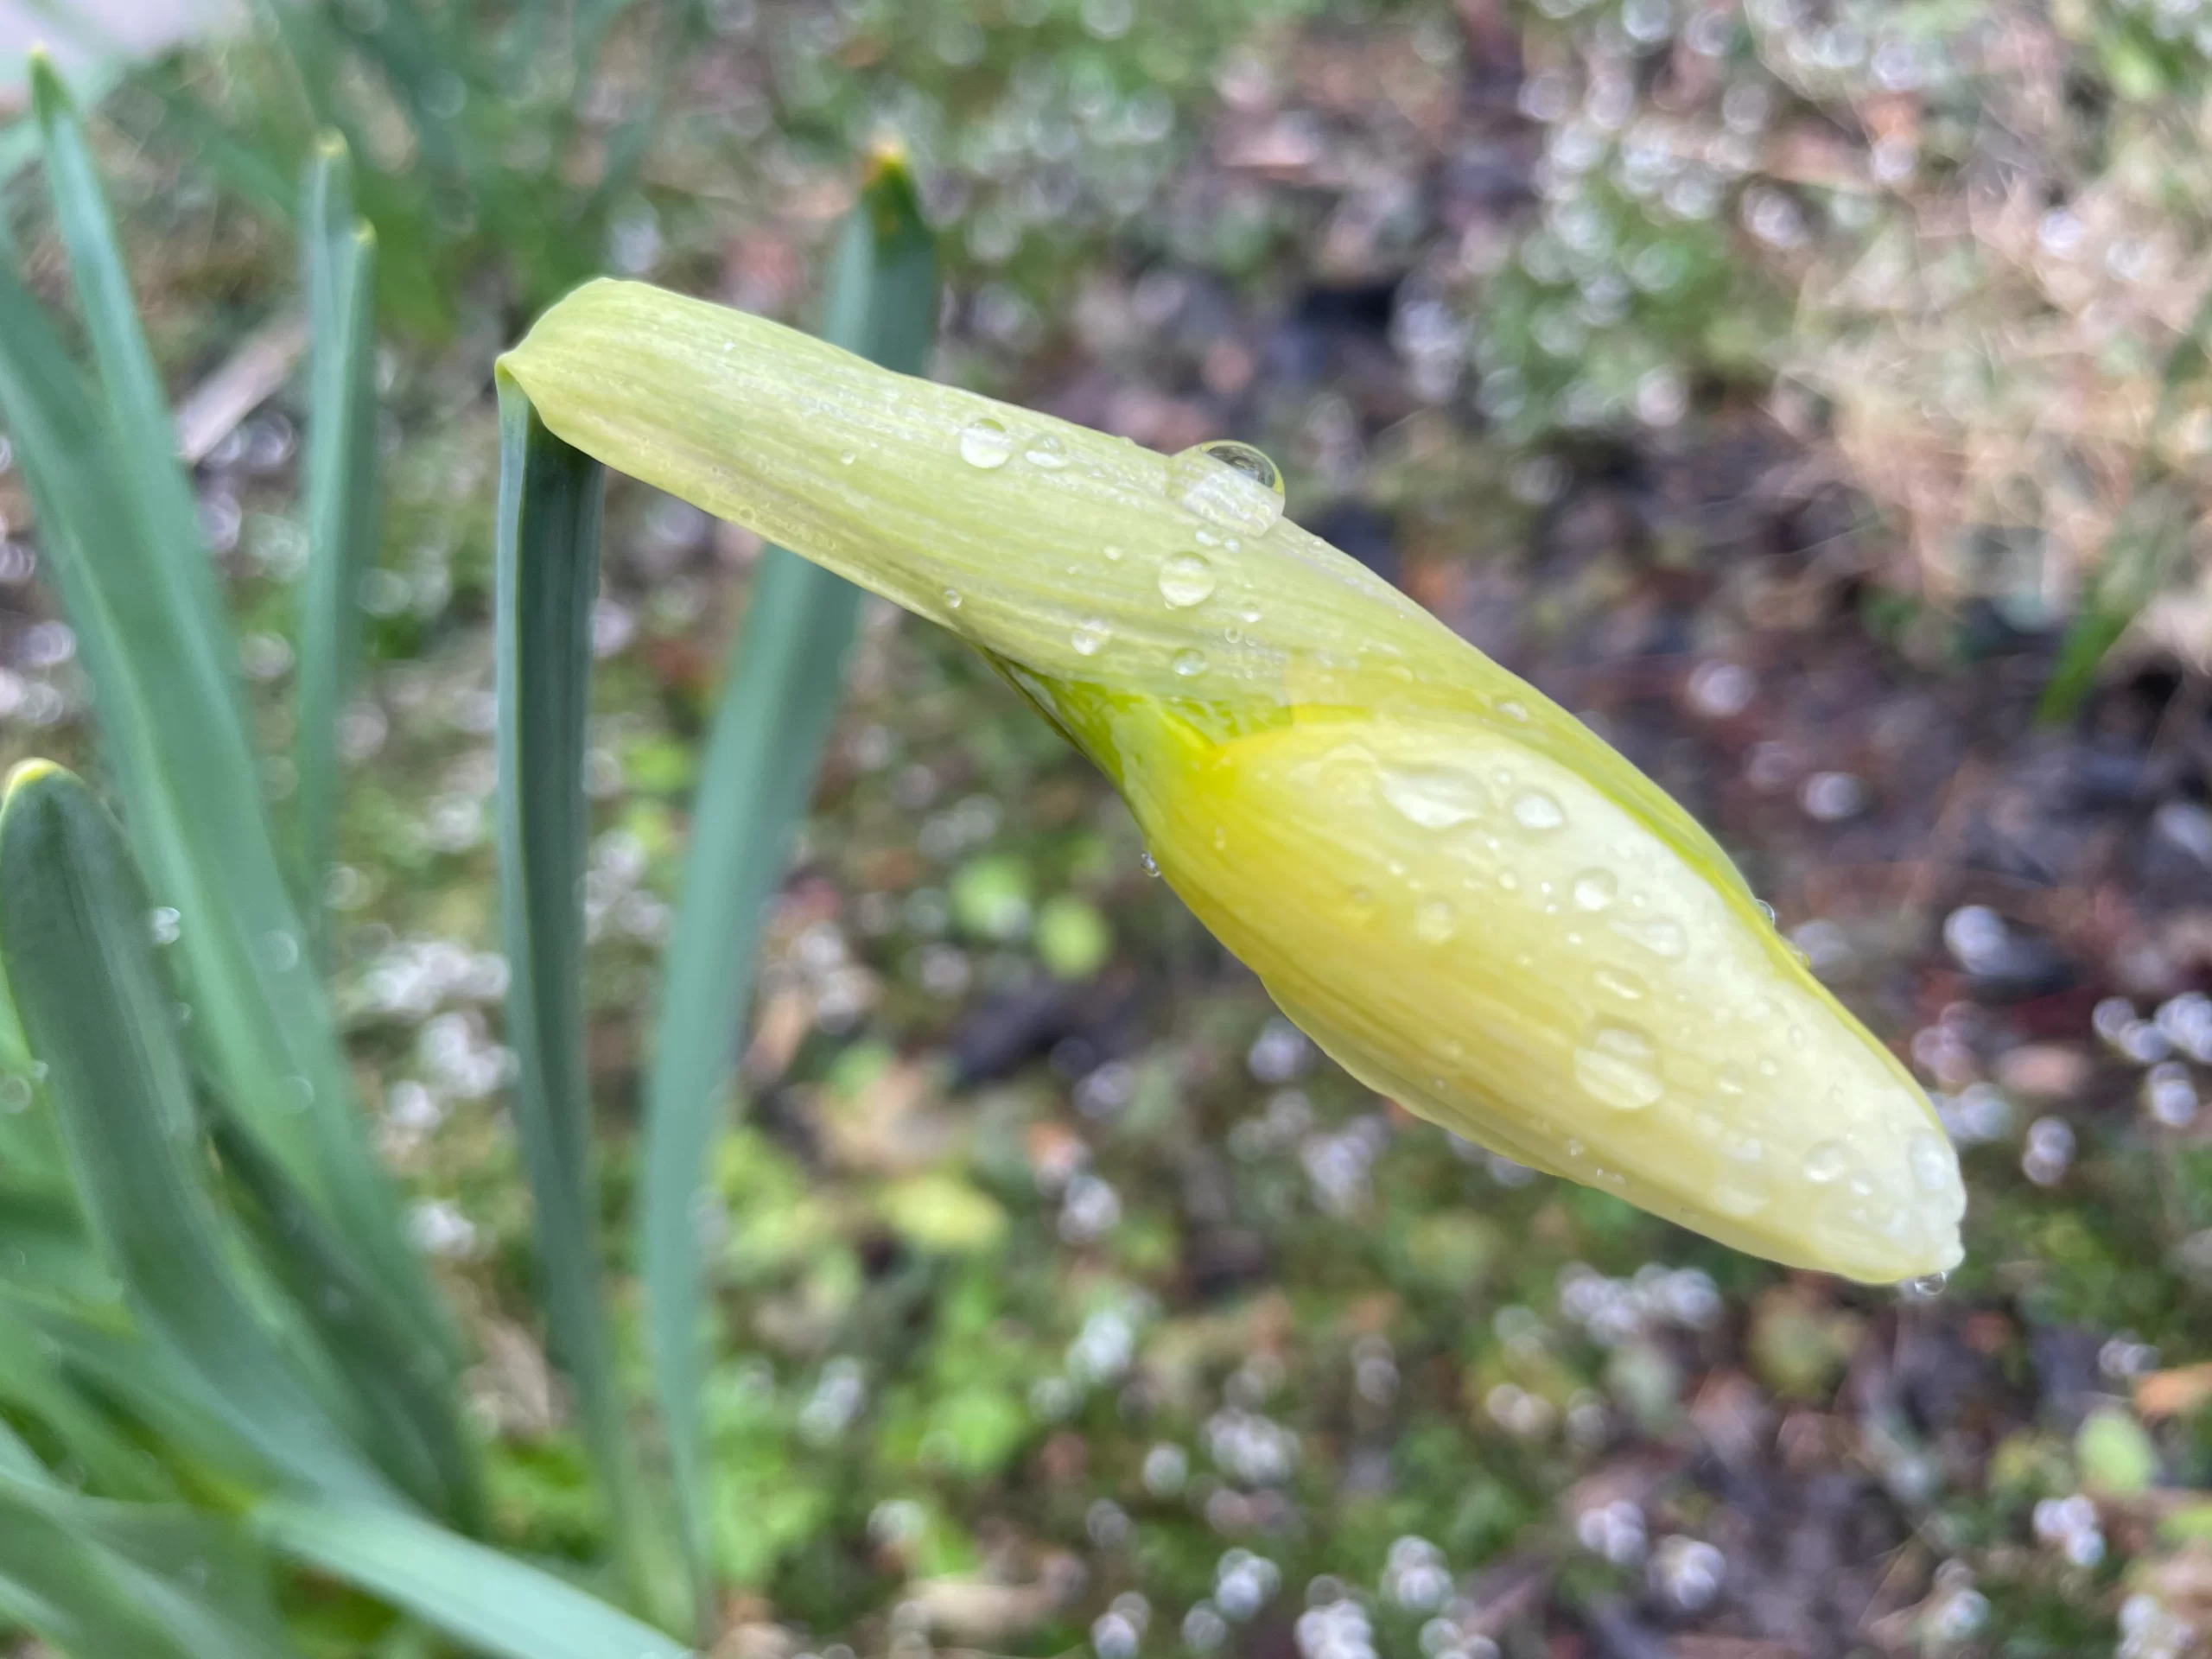 daffodil bloom not opened yet with drops of rain